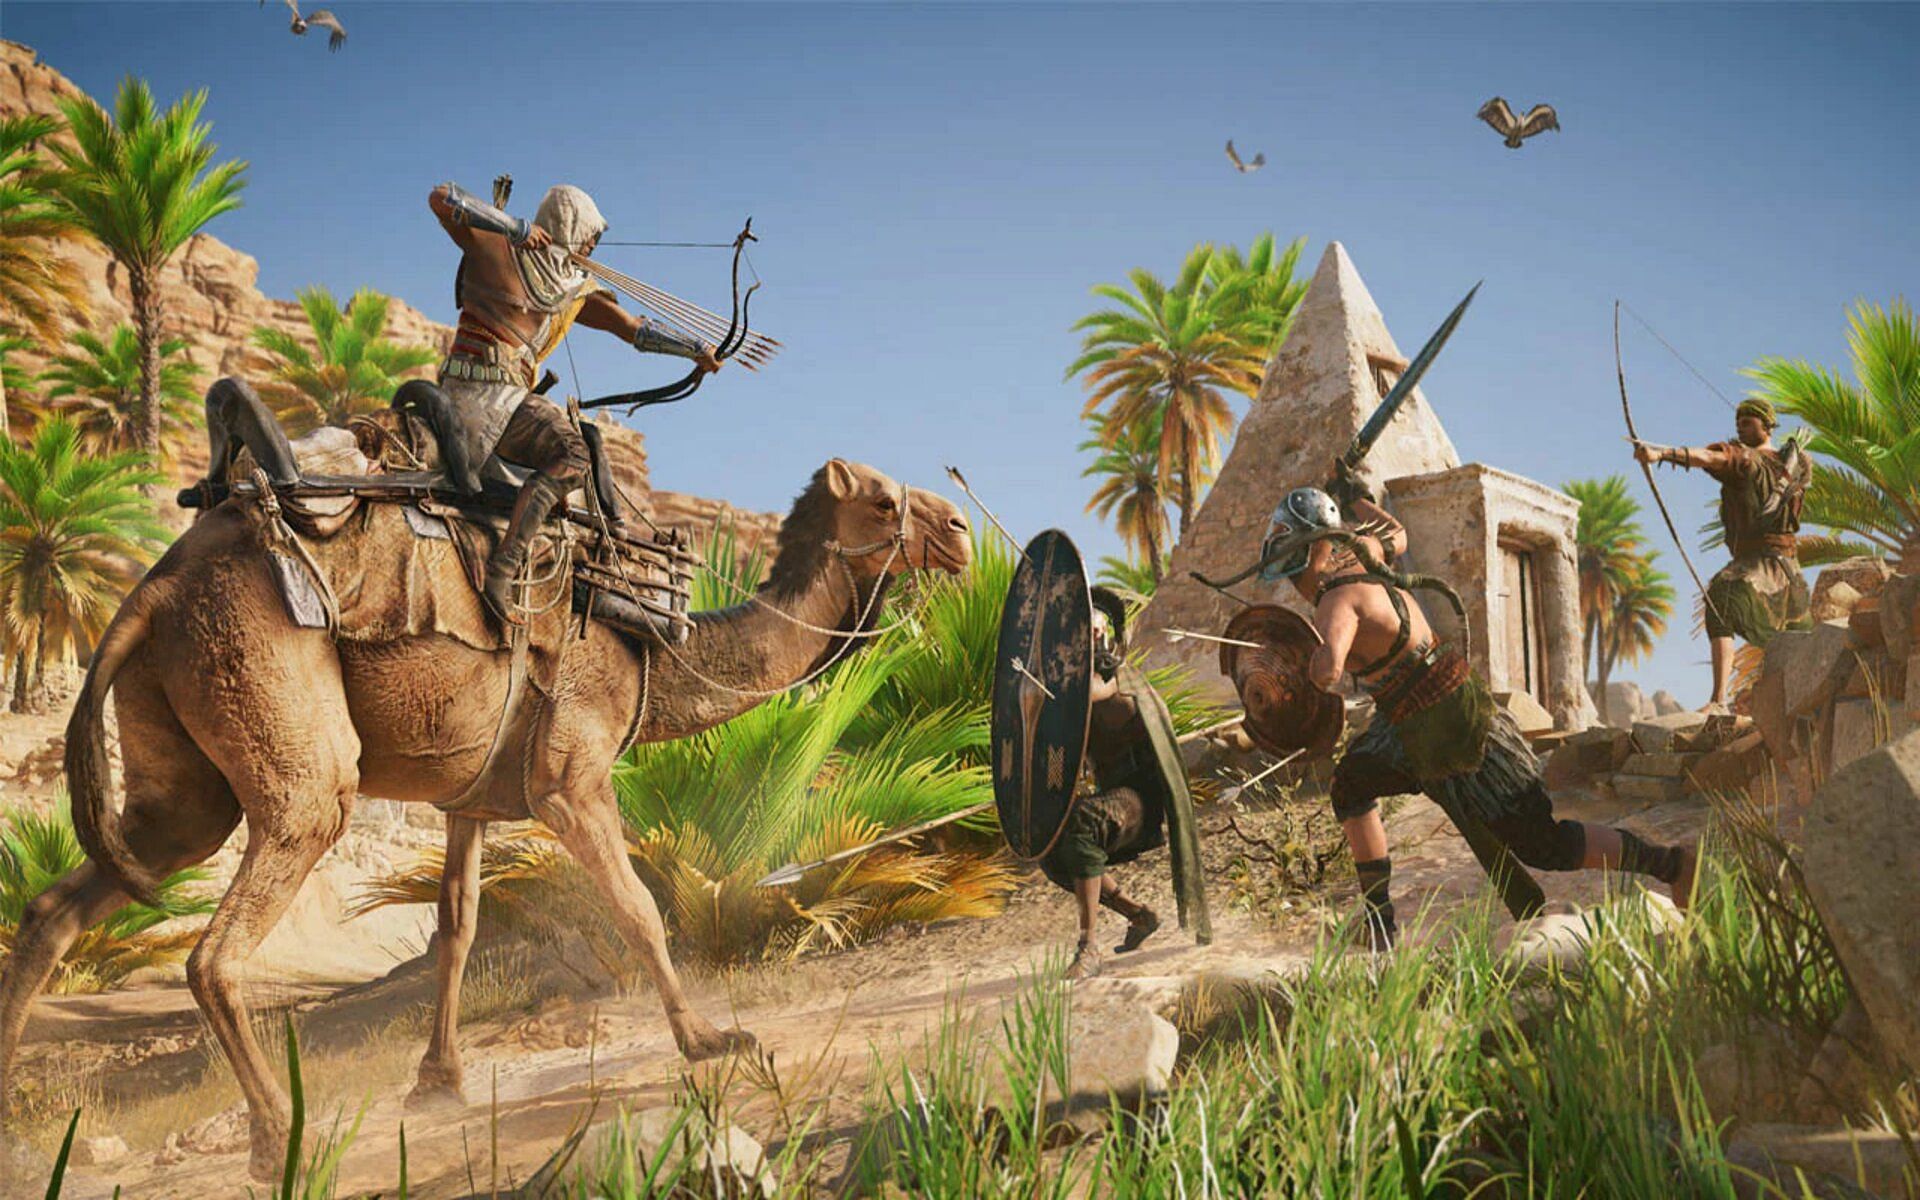 Bayek engaging in a fight with bow and arrow on his camel.